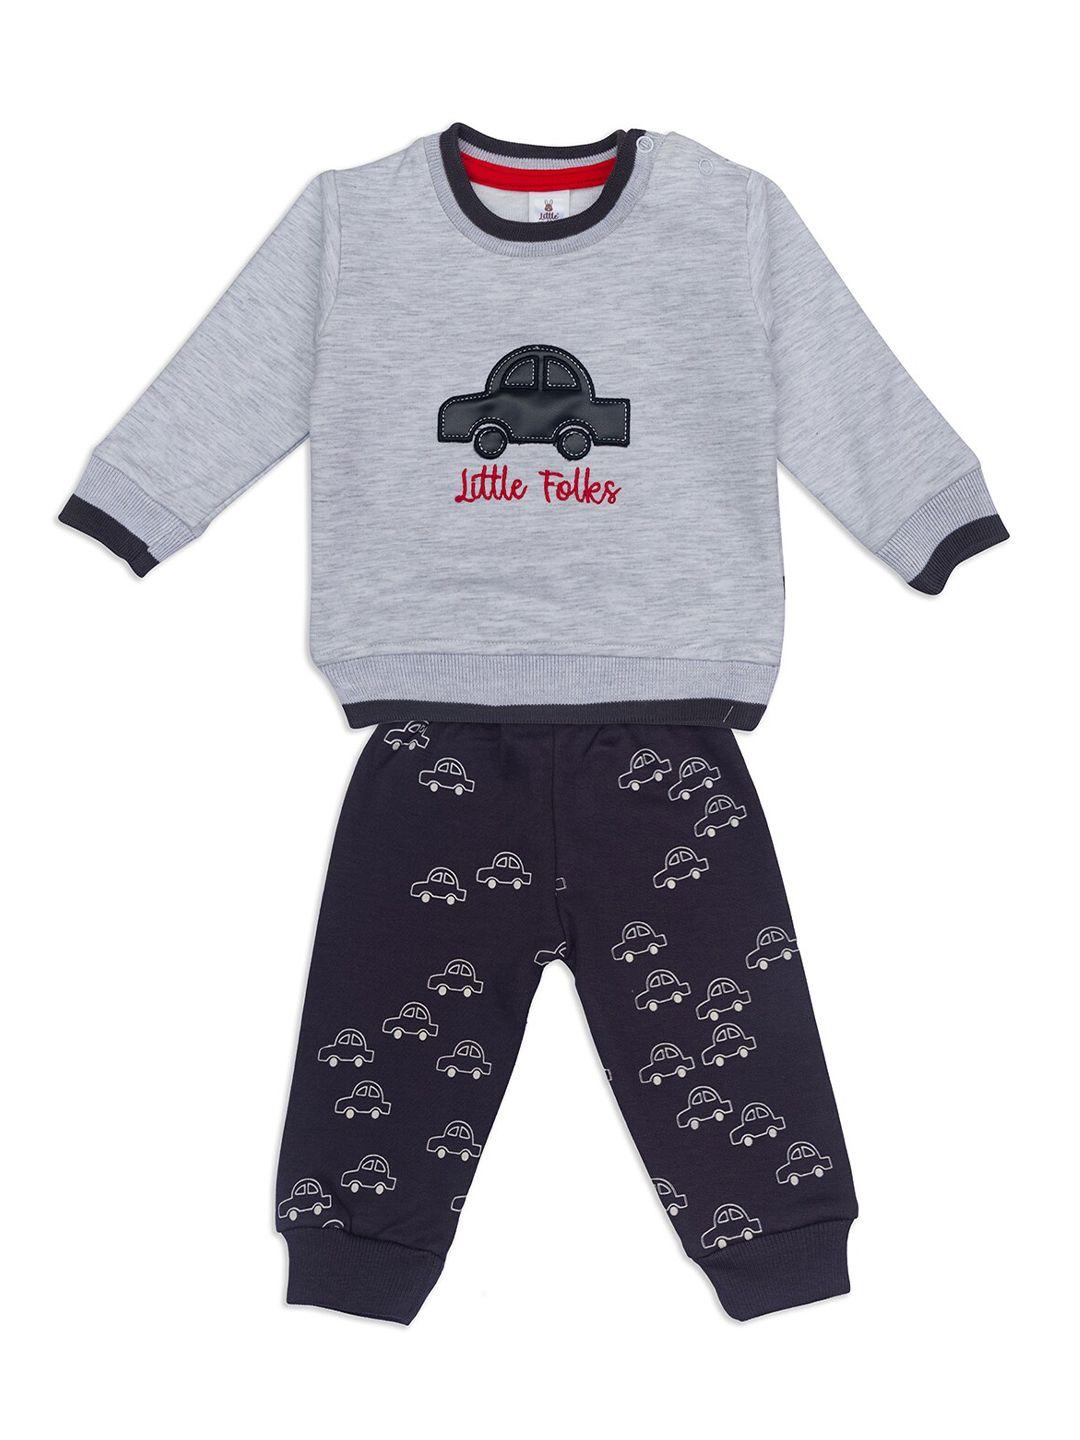 little folks unisex kids grey & navy blue printed pure cotton t-shirt with trousers